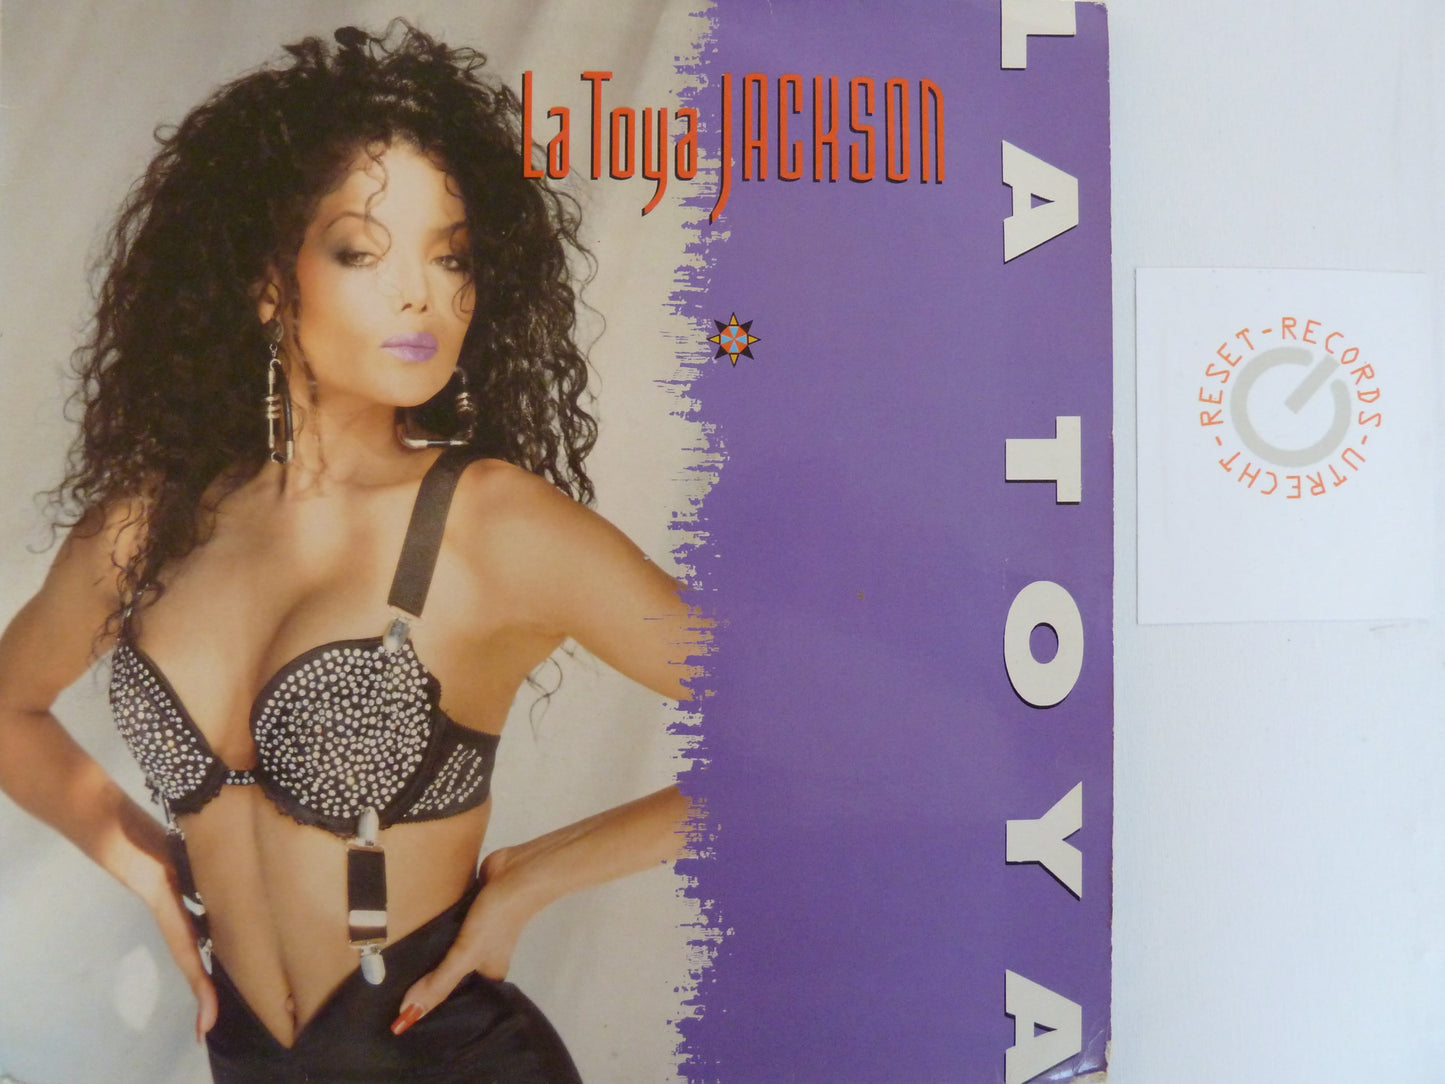 In the shadow of your famous family #3 inspired by La Toya Jackson – La Toya